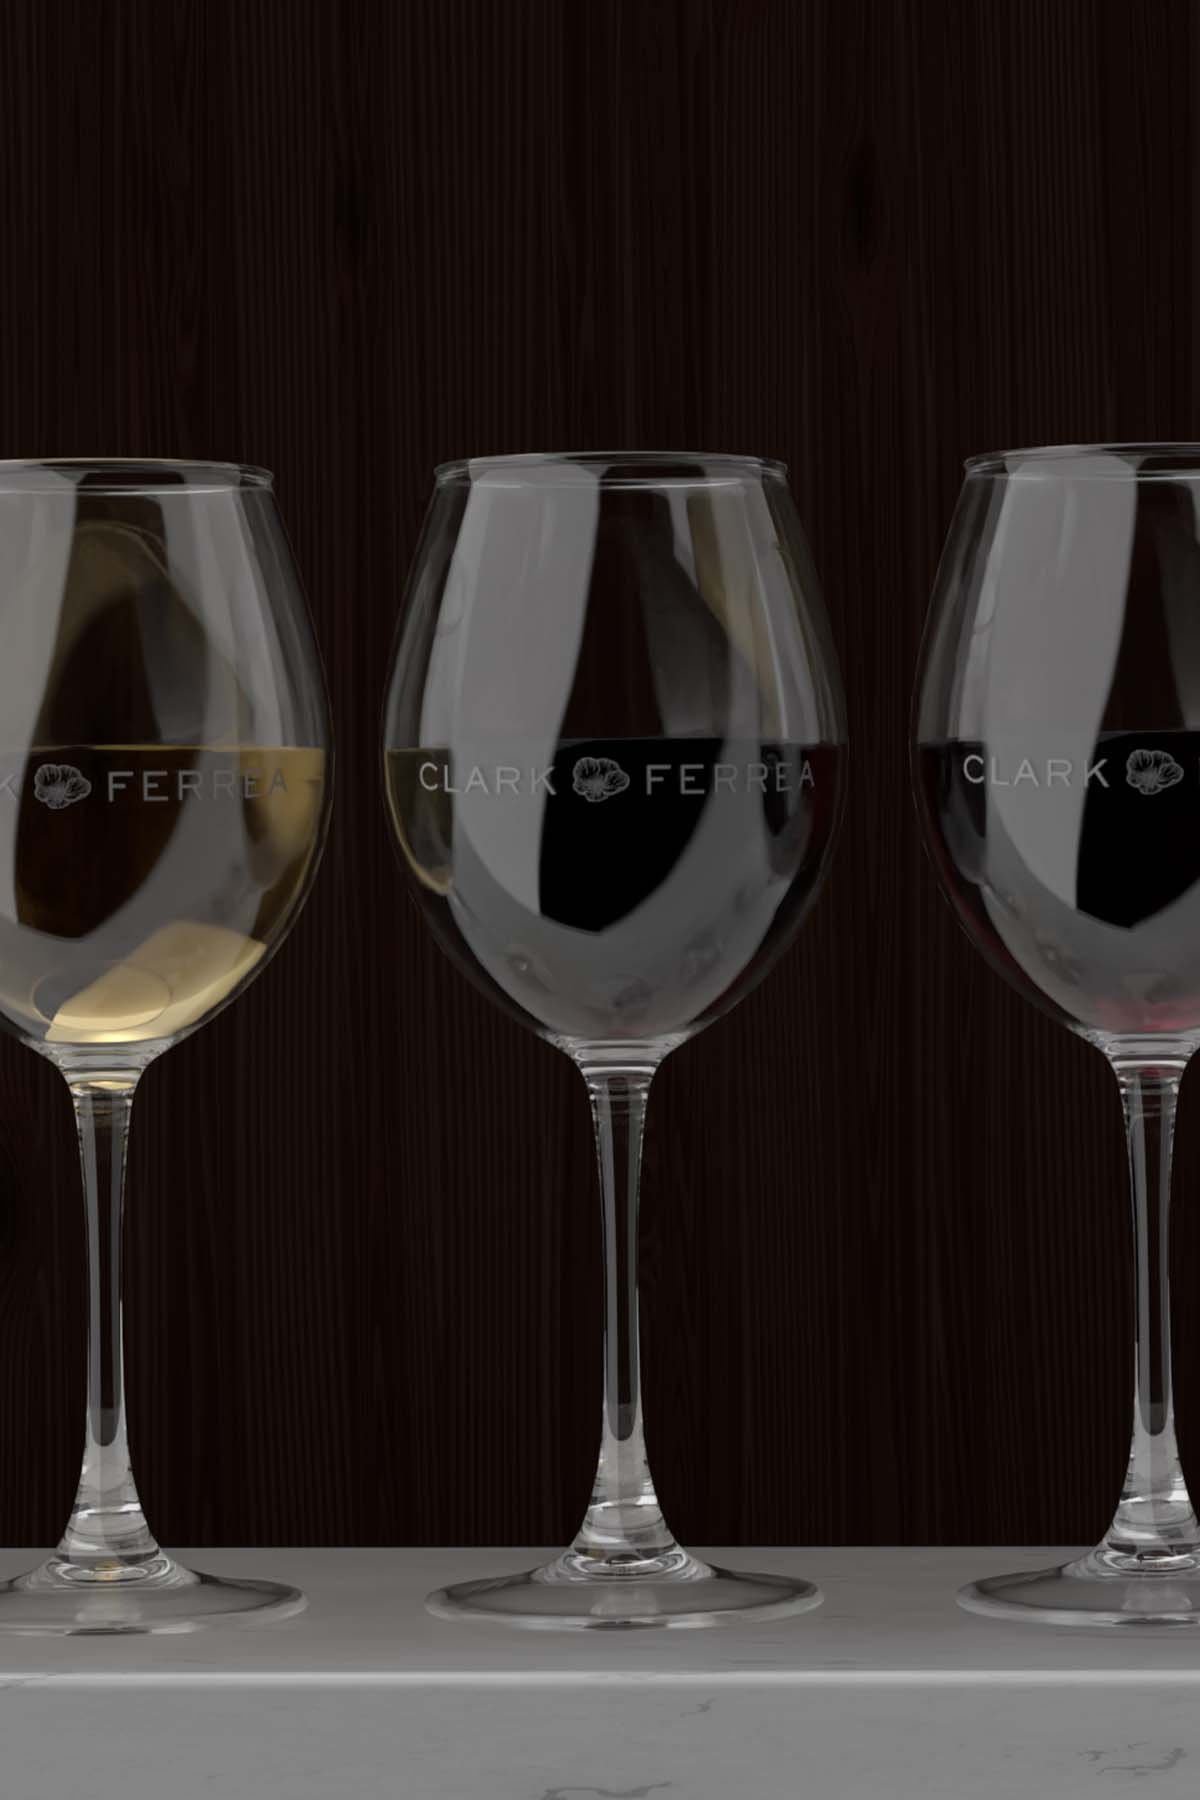 a close up photo of three Clark Ferrea wine glasses filled with wine